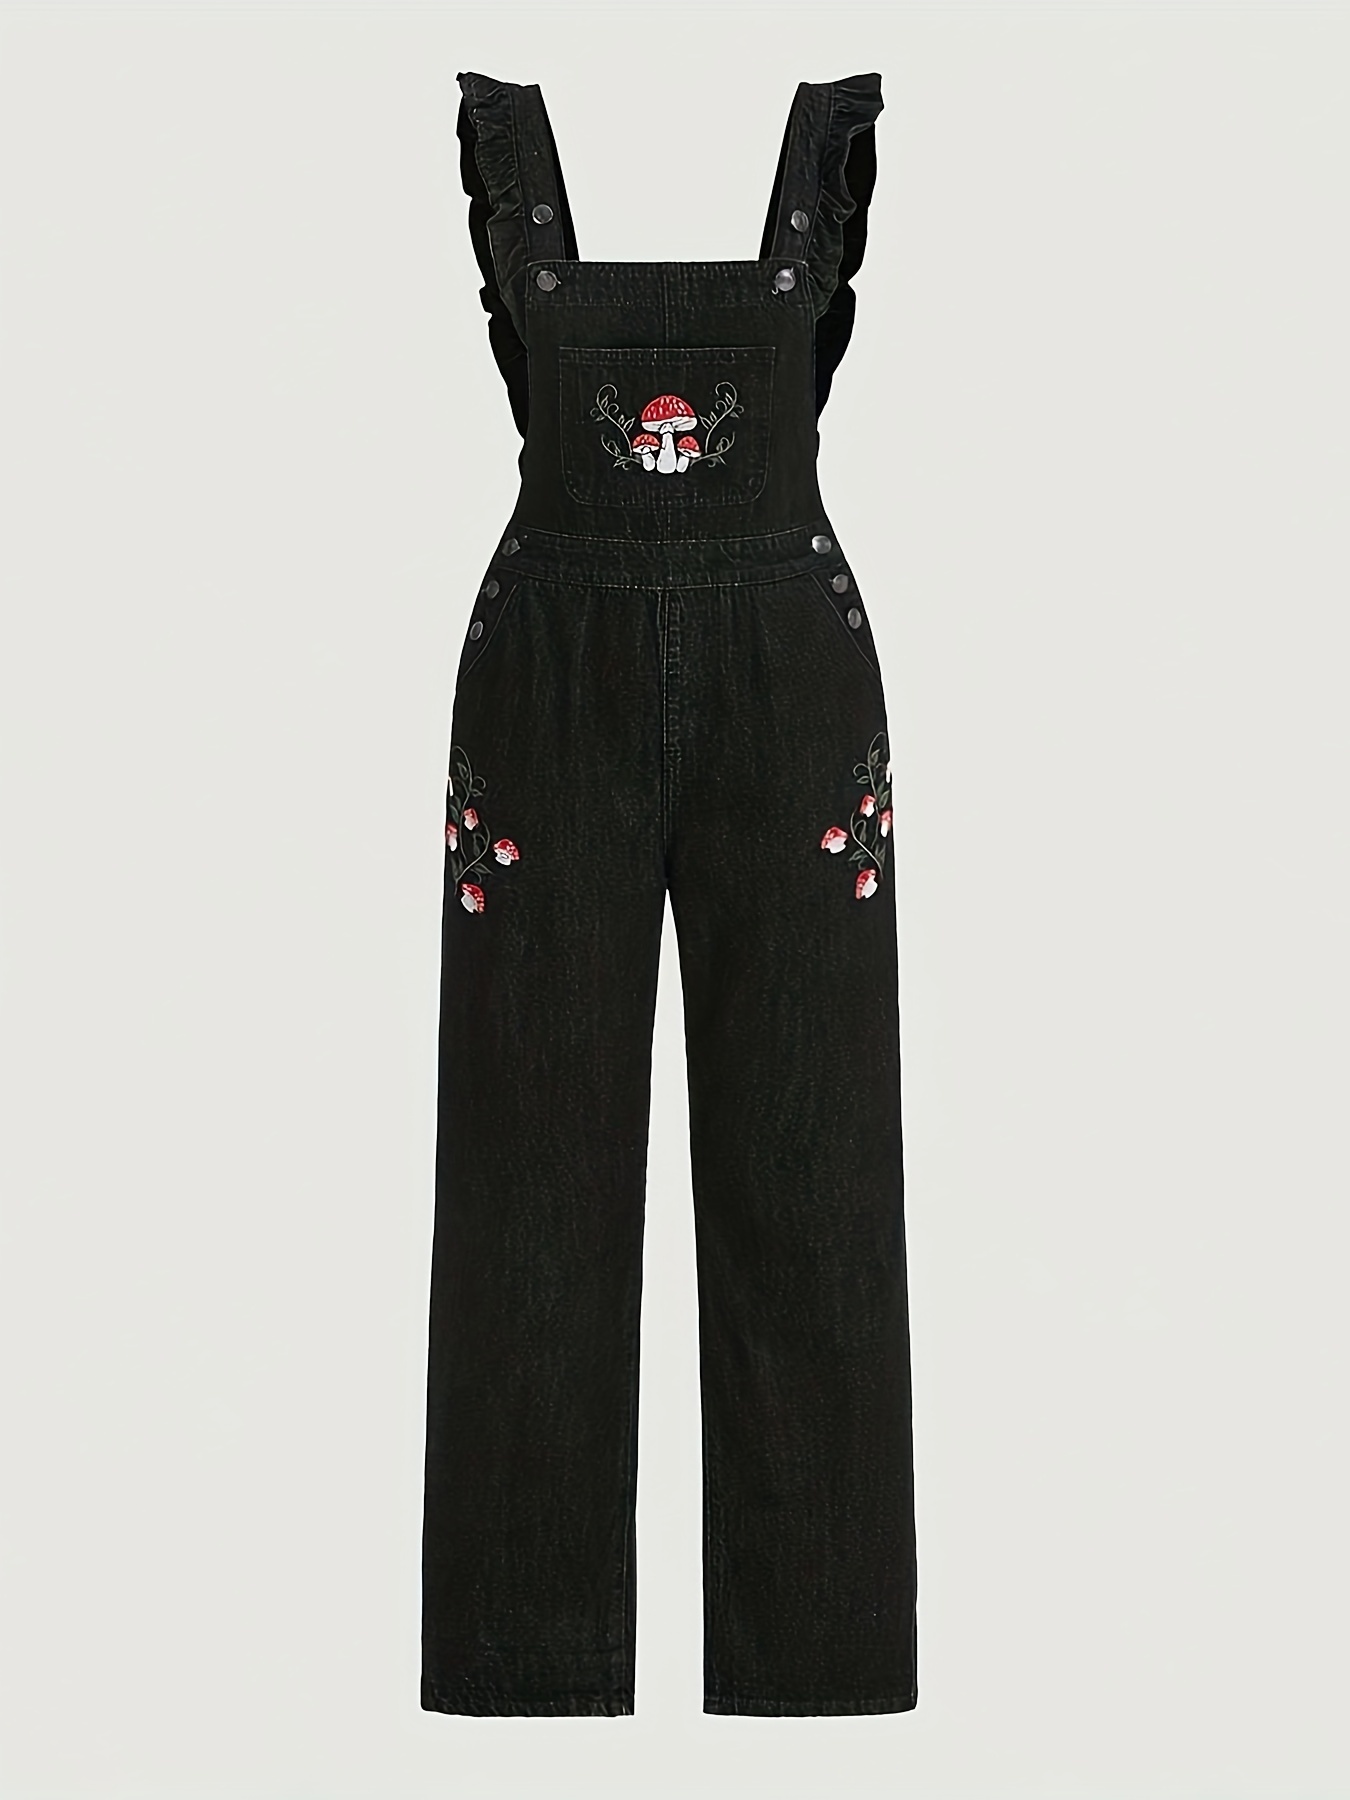 Piwonia - Letter Embroidered Distressed Wide Leg Denim Dungaree